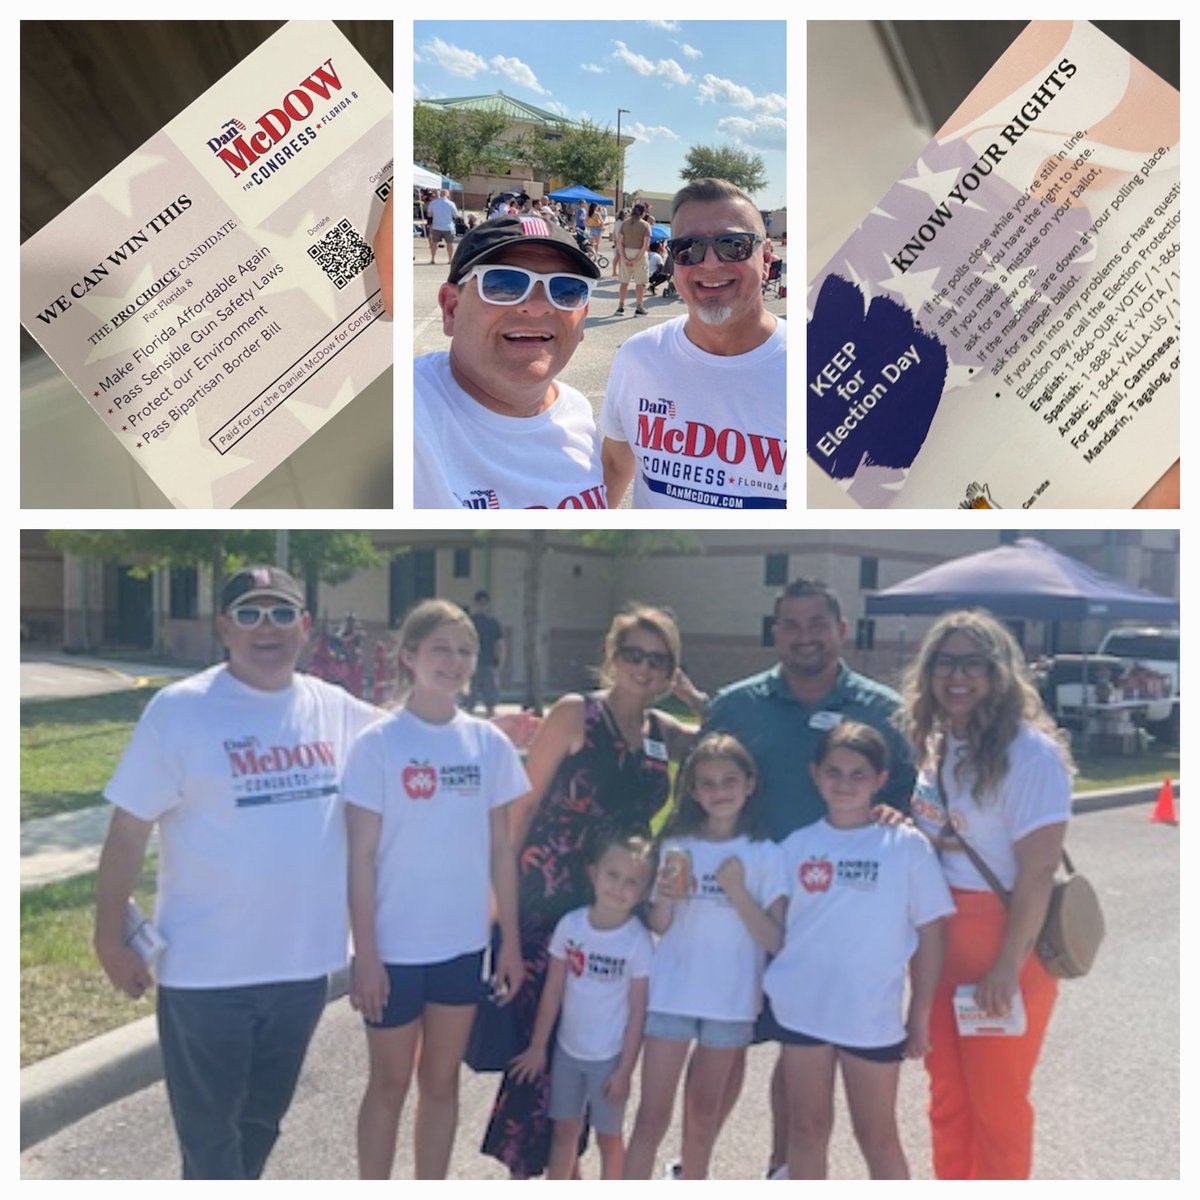 What a great afternoon! We've been handing out campaign palm cards at the Palm Bay Asian Fest with fellow candidates. #TakeBackFL #McDow4Congress